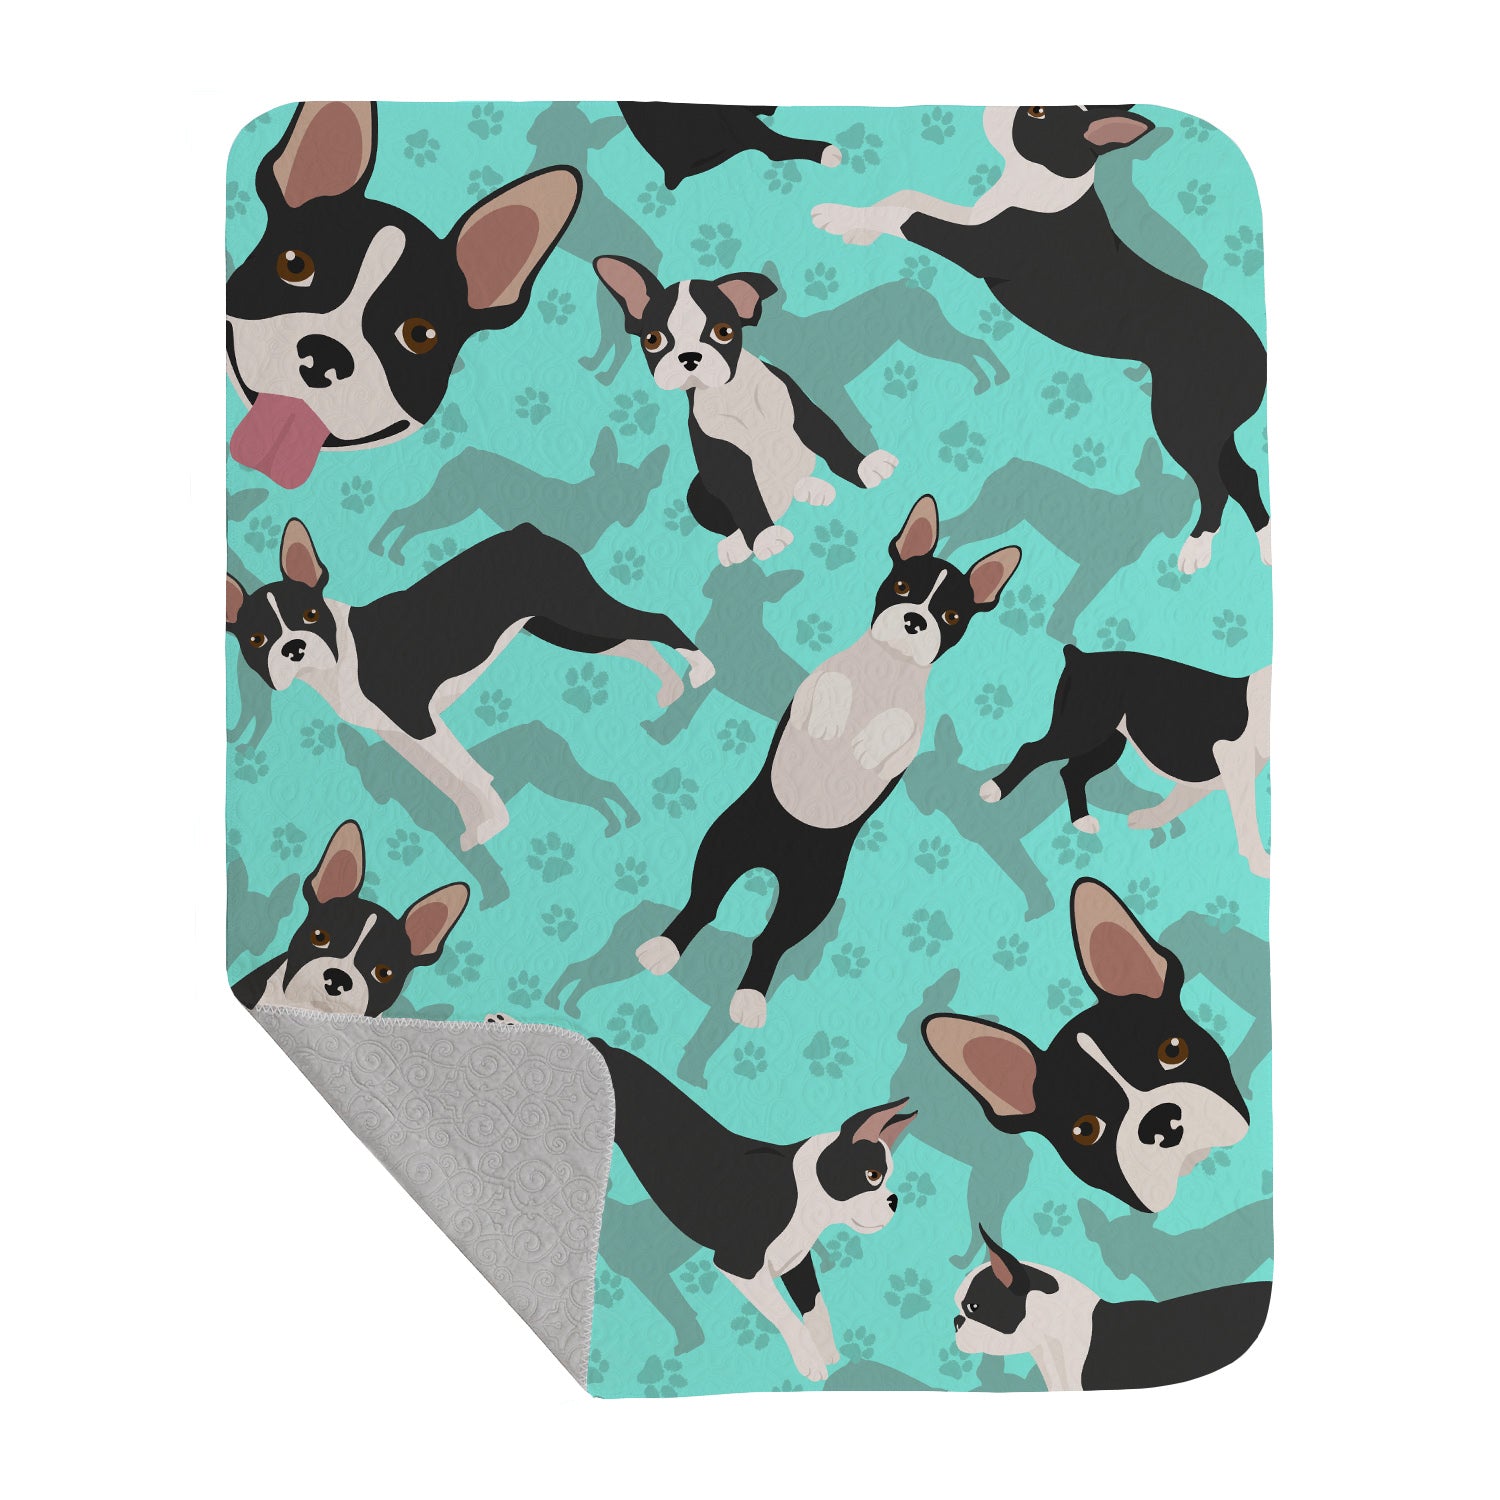 Buy this Boston Terrier Quilted Blanket 50x60